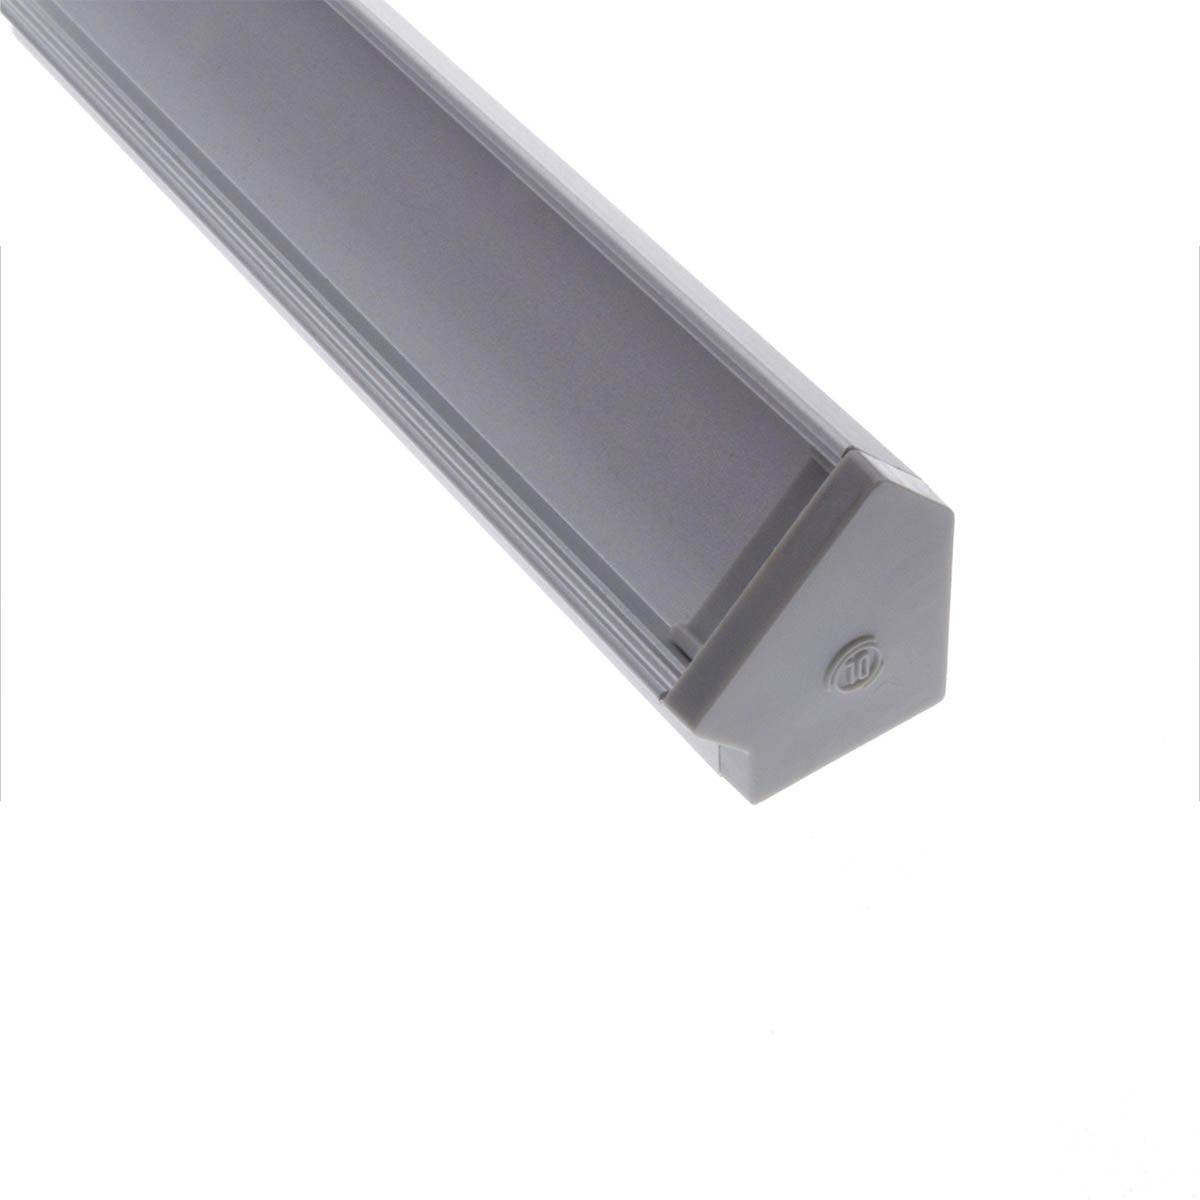 96in. Chromapath Builder, 45 degree LED Aluminum channel, Corner, for Strips Up To 12mm, Pack of 10